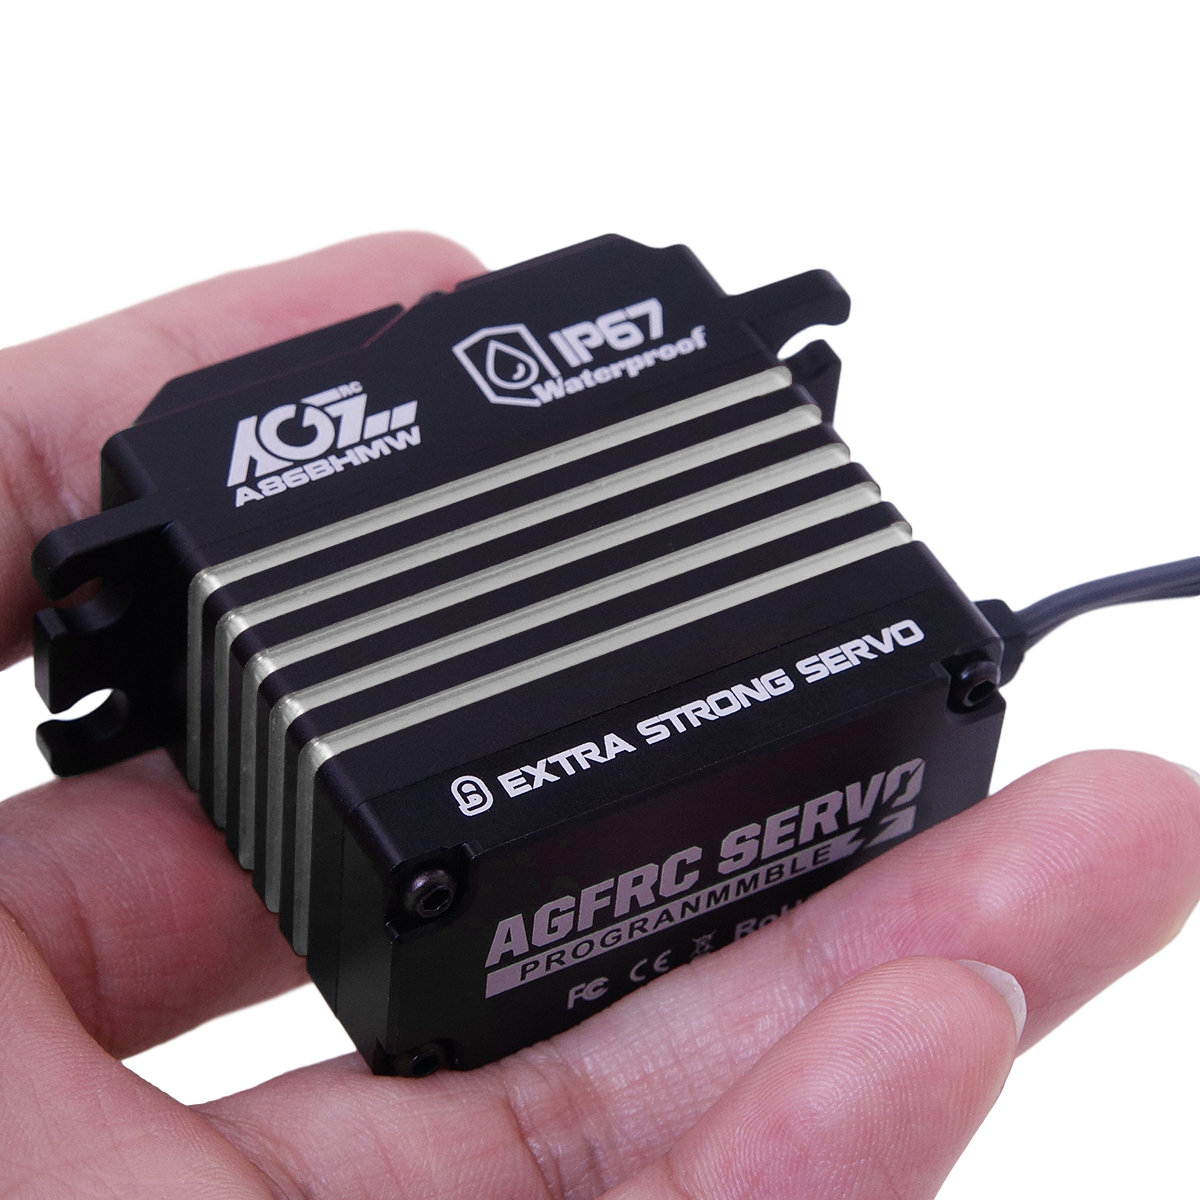 Programmable Metal Gear Brushless Servo for 1/8 RC Models Red AGFRC 55KG Digital-Steering-Servo High-Torque Waterproof Control Angle 180° A86BHMW